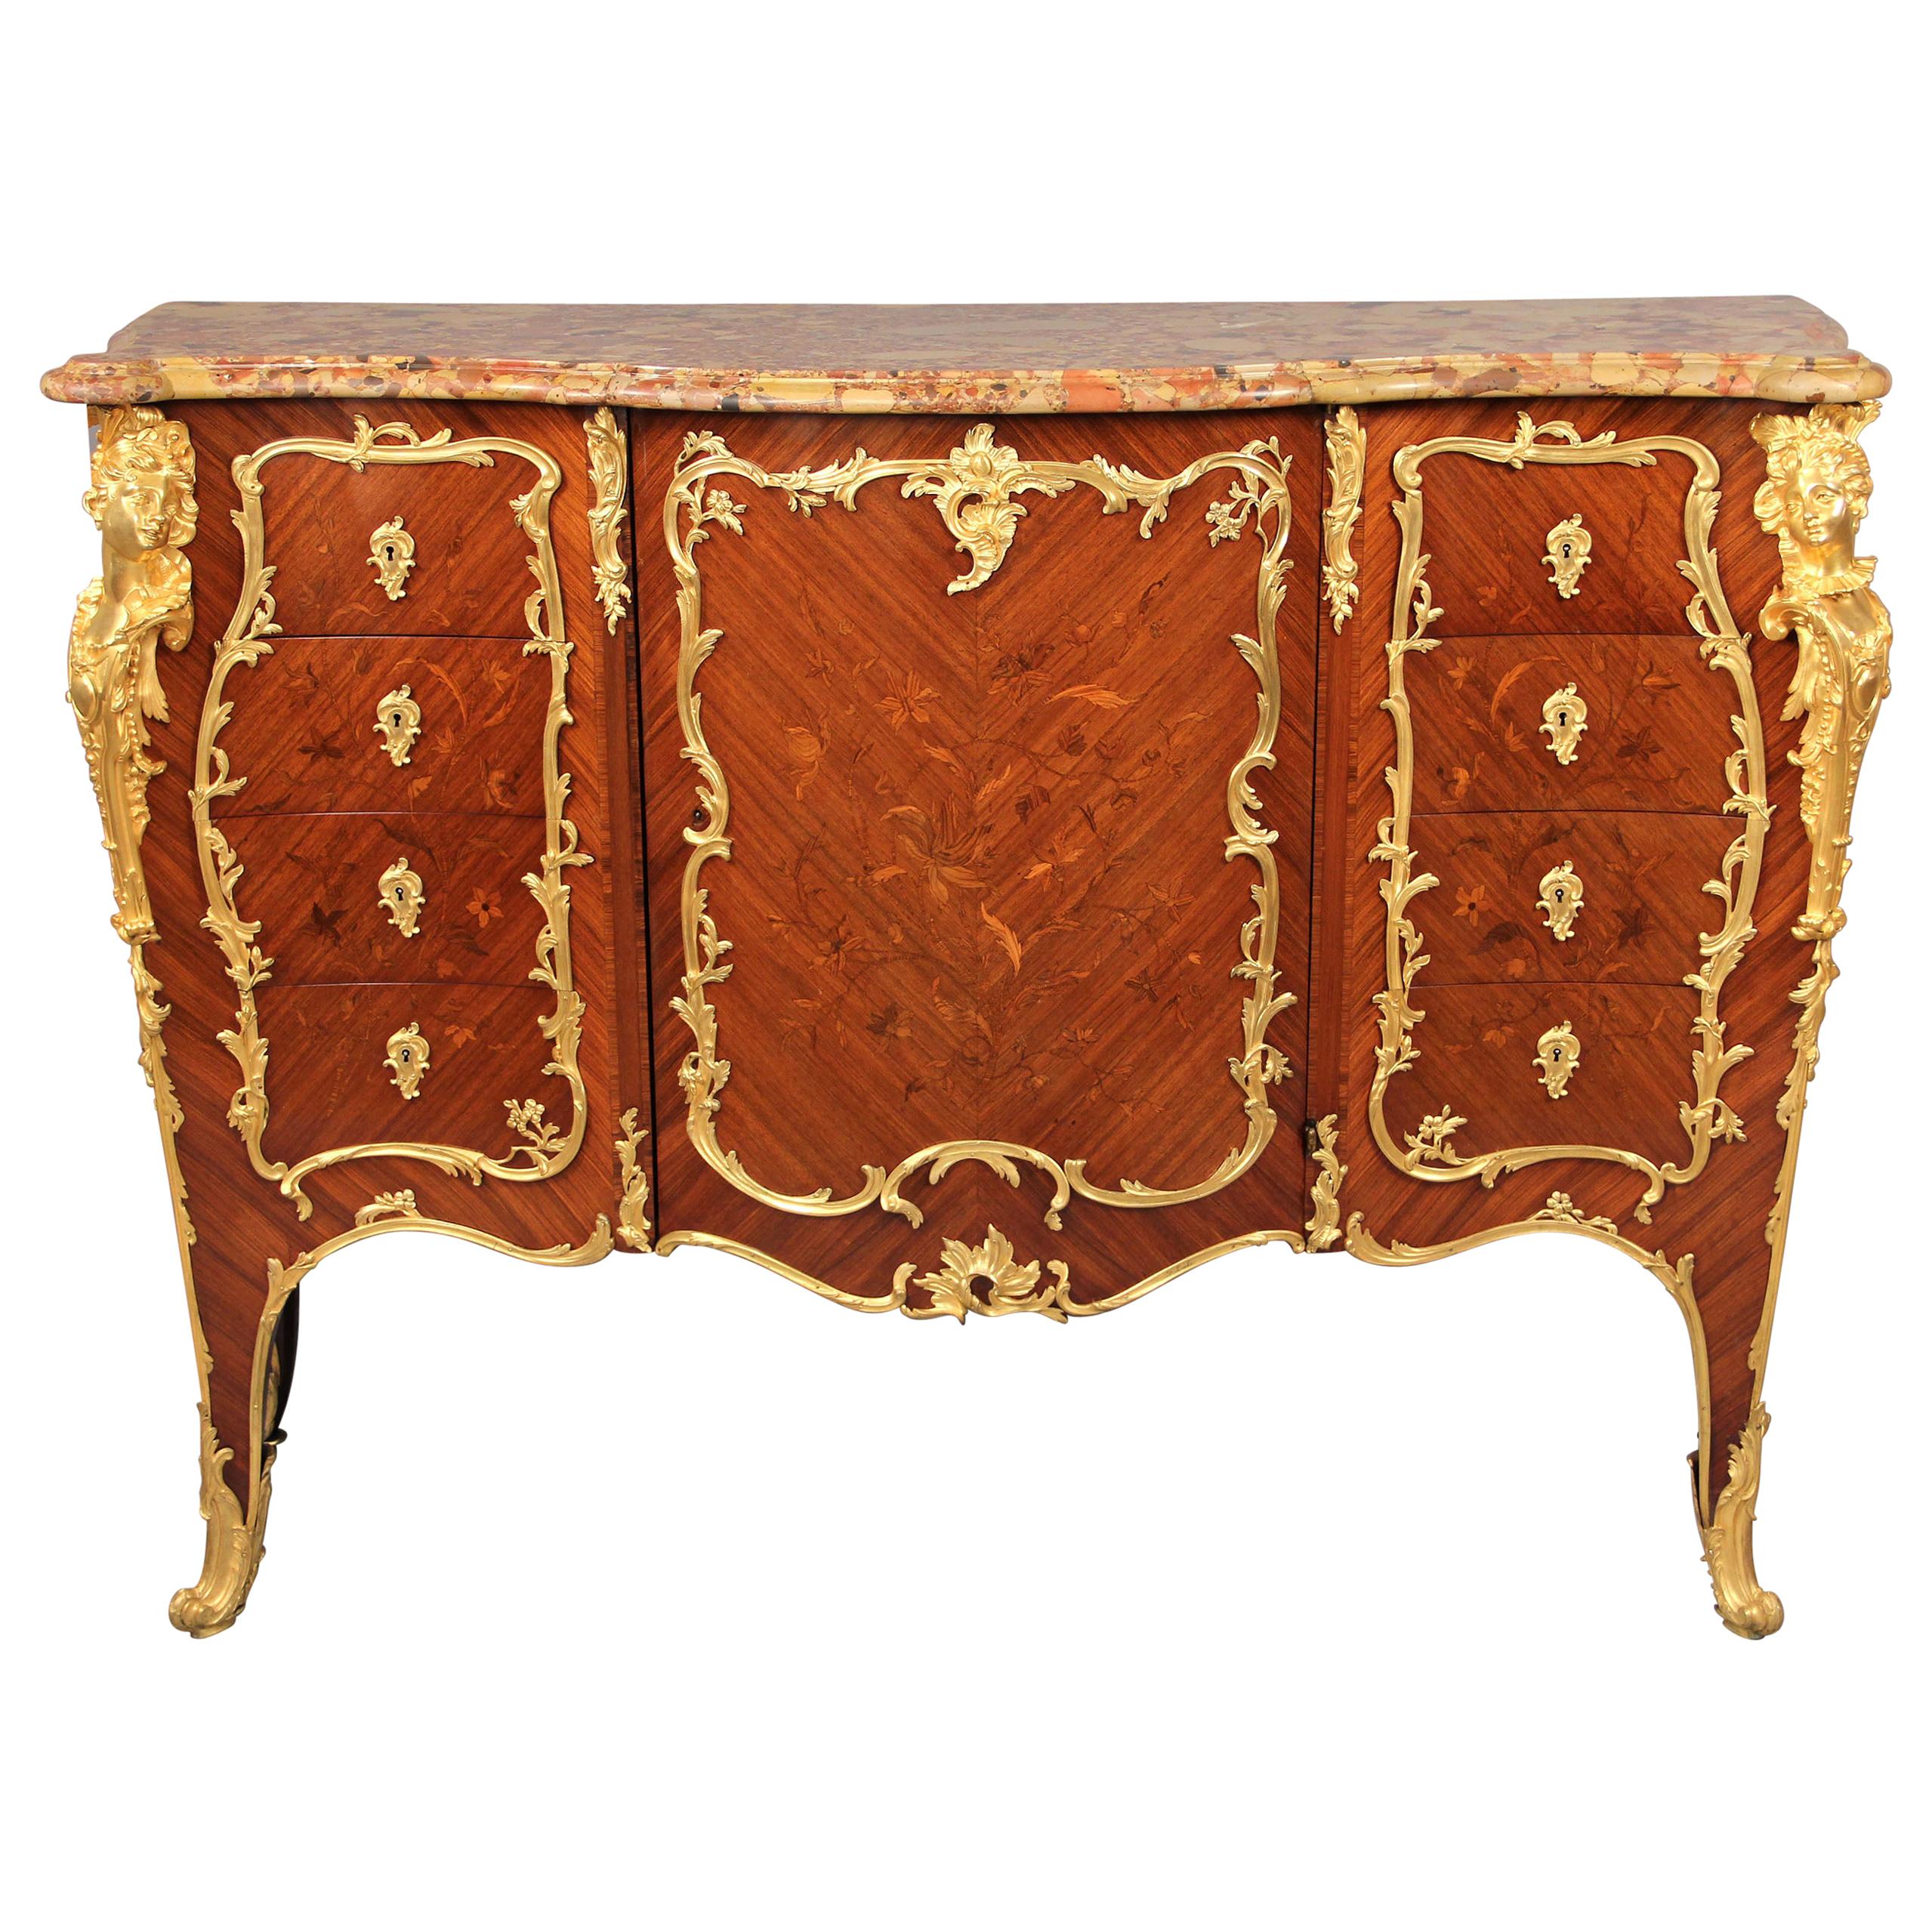 Stunning Late 19th Century Gilt Bronze Mounted Marquetry Cabinet -François Linke